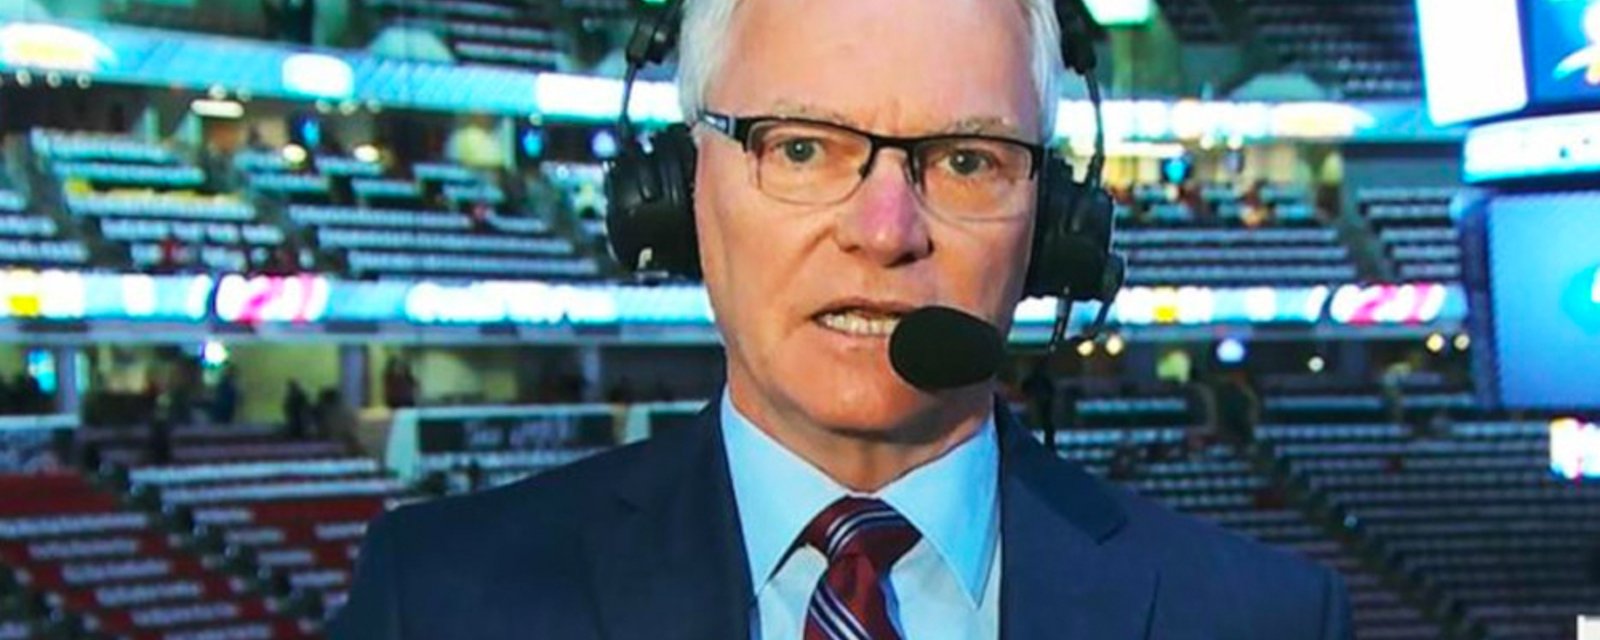 Sportsnet and CBC drop Jim Hughson from opening round playoff coverage